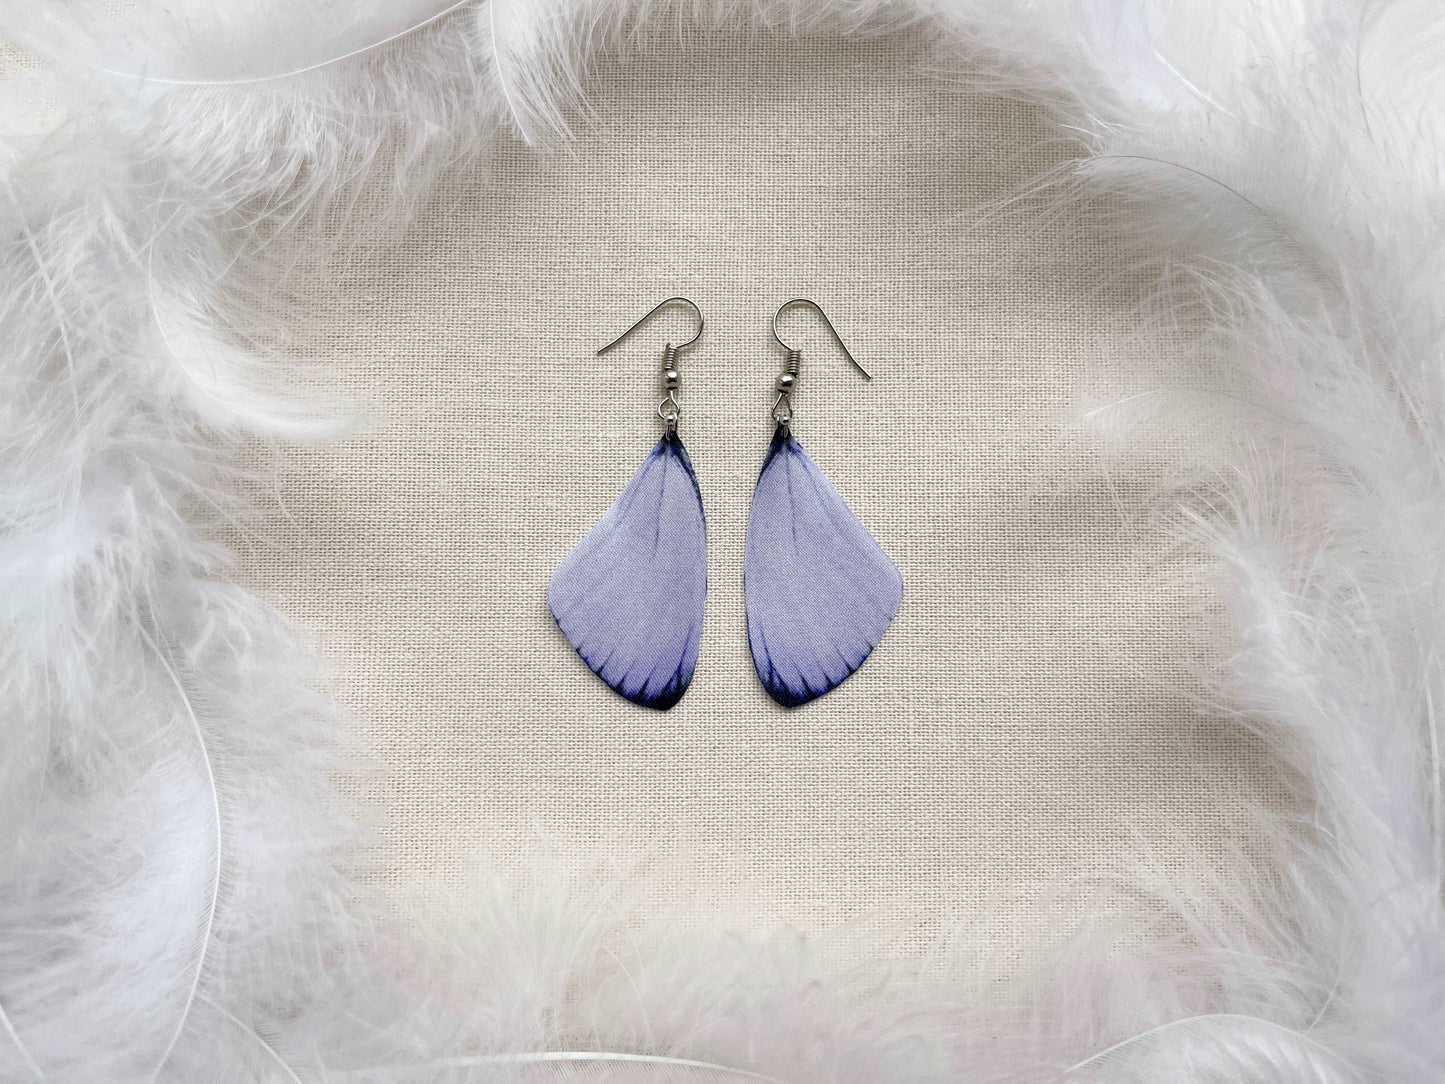 Lilac faux butterfly wing earrings - great addition to any outfit